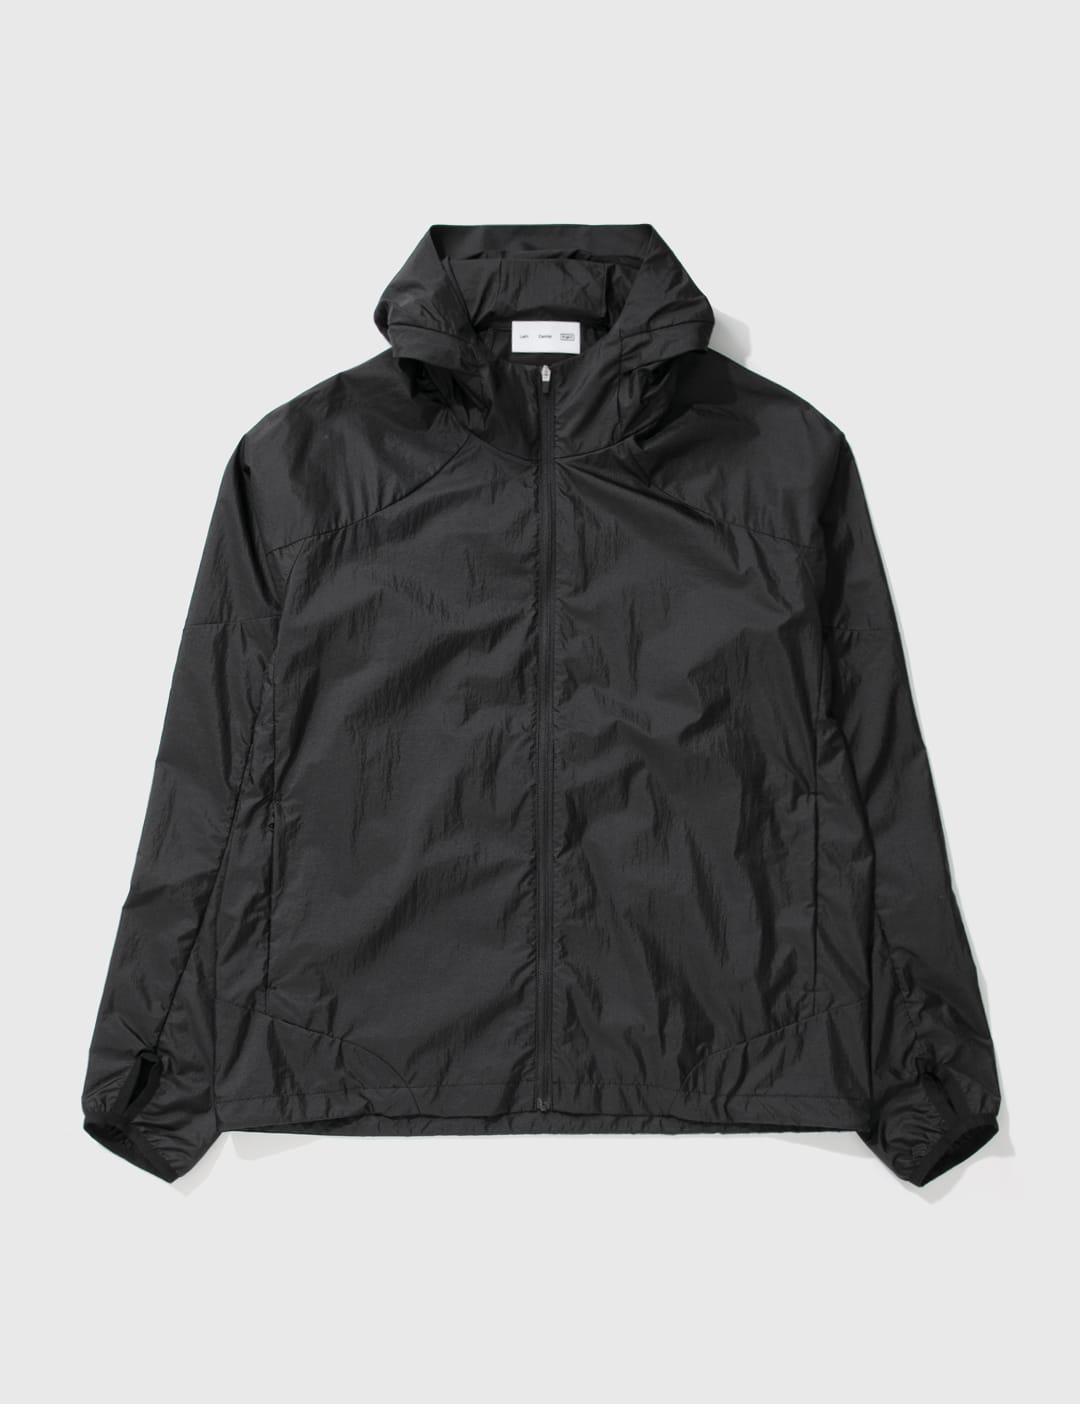 POST ARCHIVE FACTION (PAF) - 5.0 JACKET RIGHT | HBX - Globally 